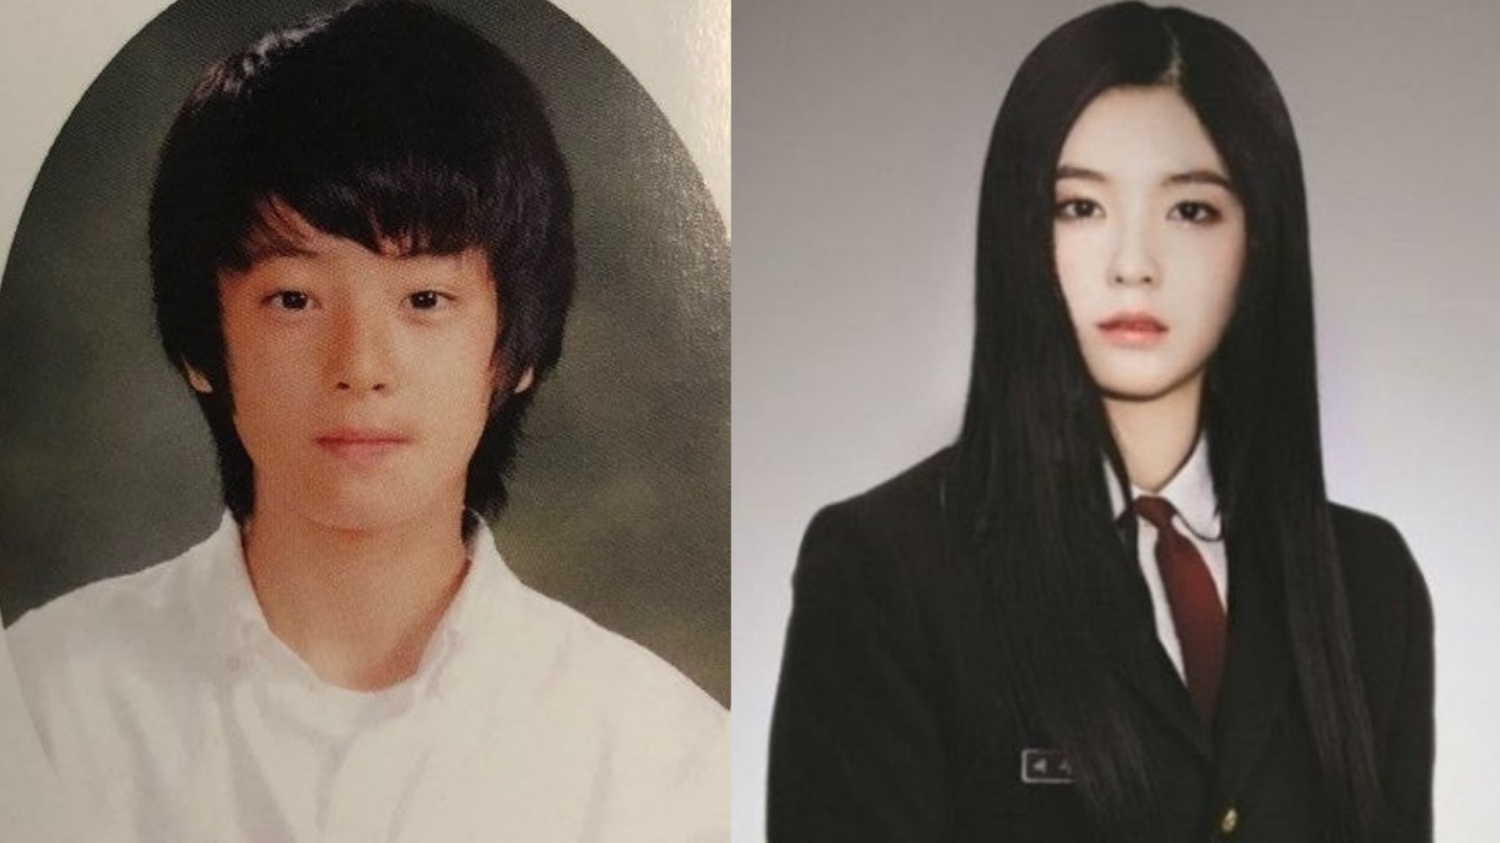 See Cha Eunwoo and Irene’s Old Photos From School That Prove They Were “Campus Crushes”